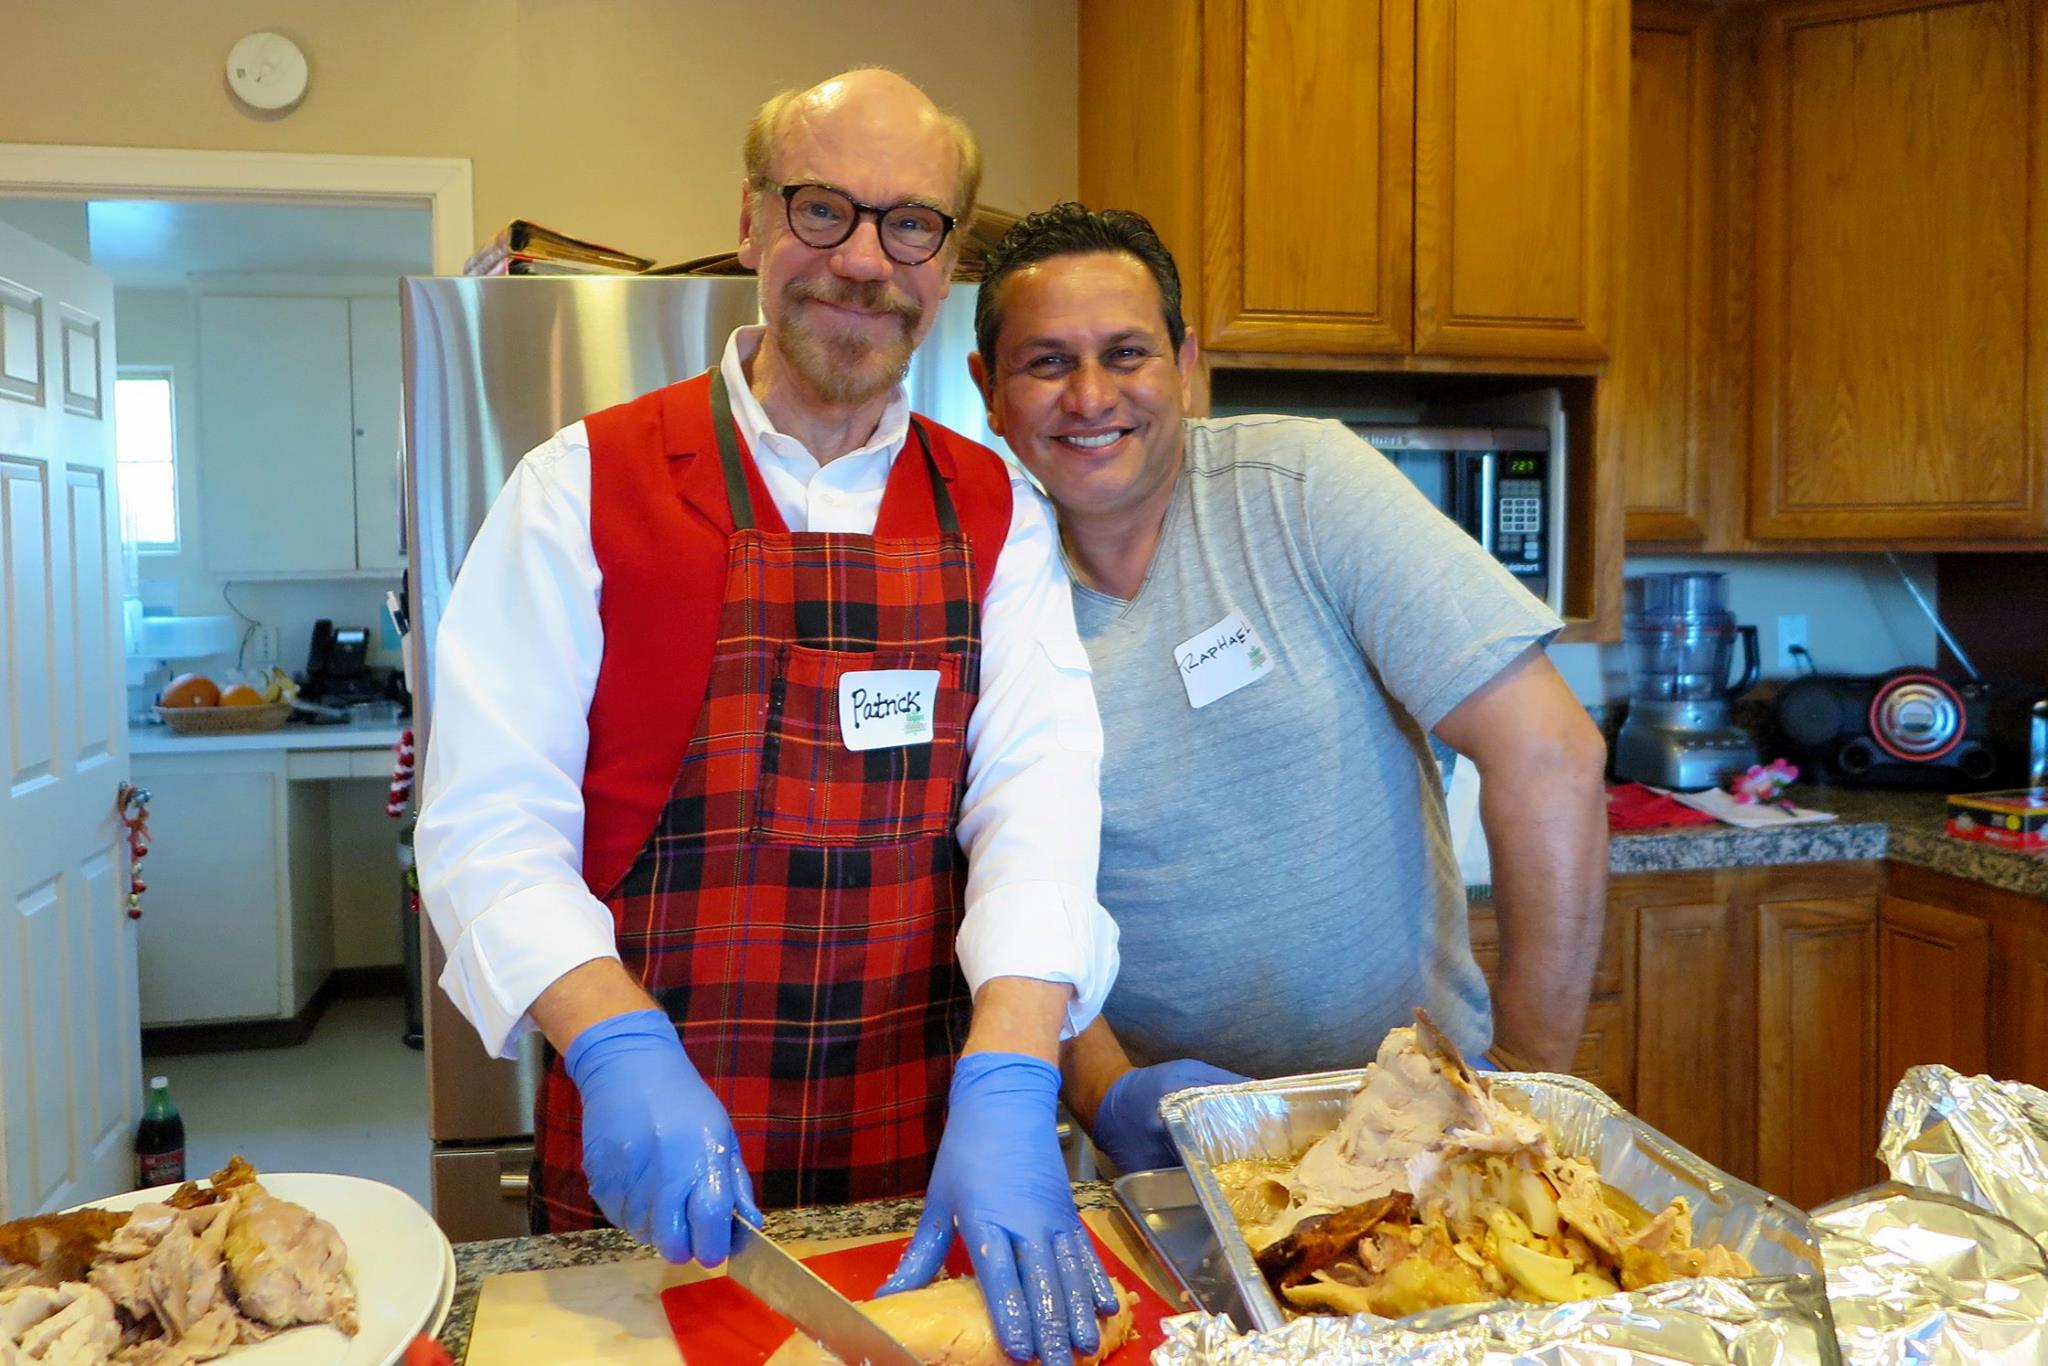 Bring & Serve Dinner – Fraternity House for AIDS/HIV